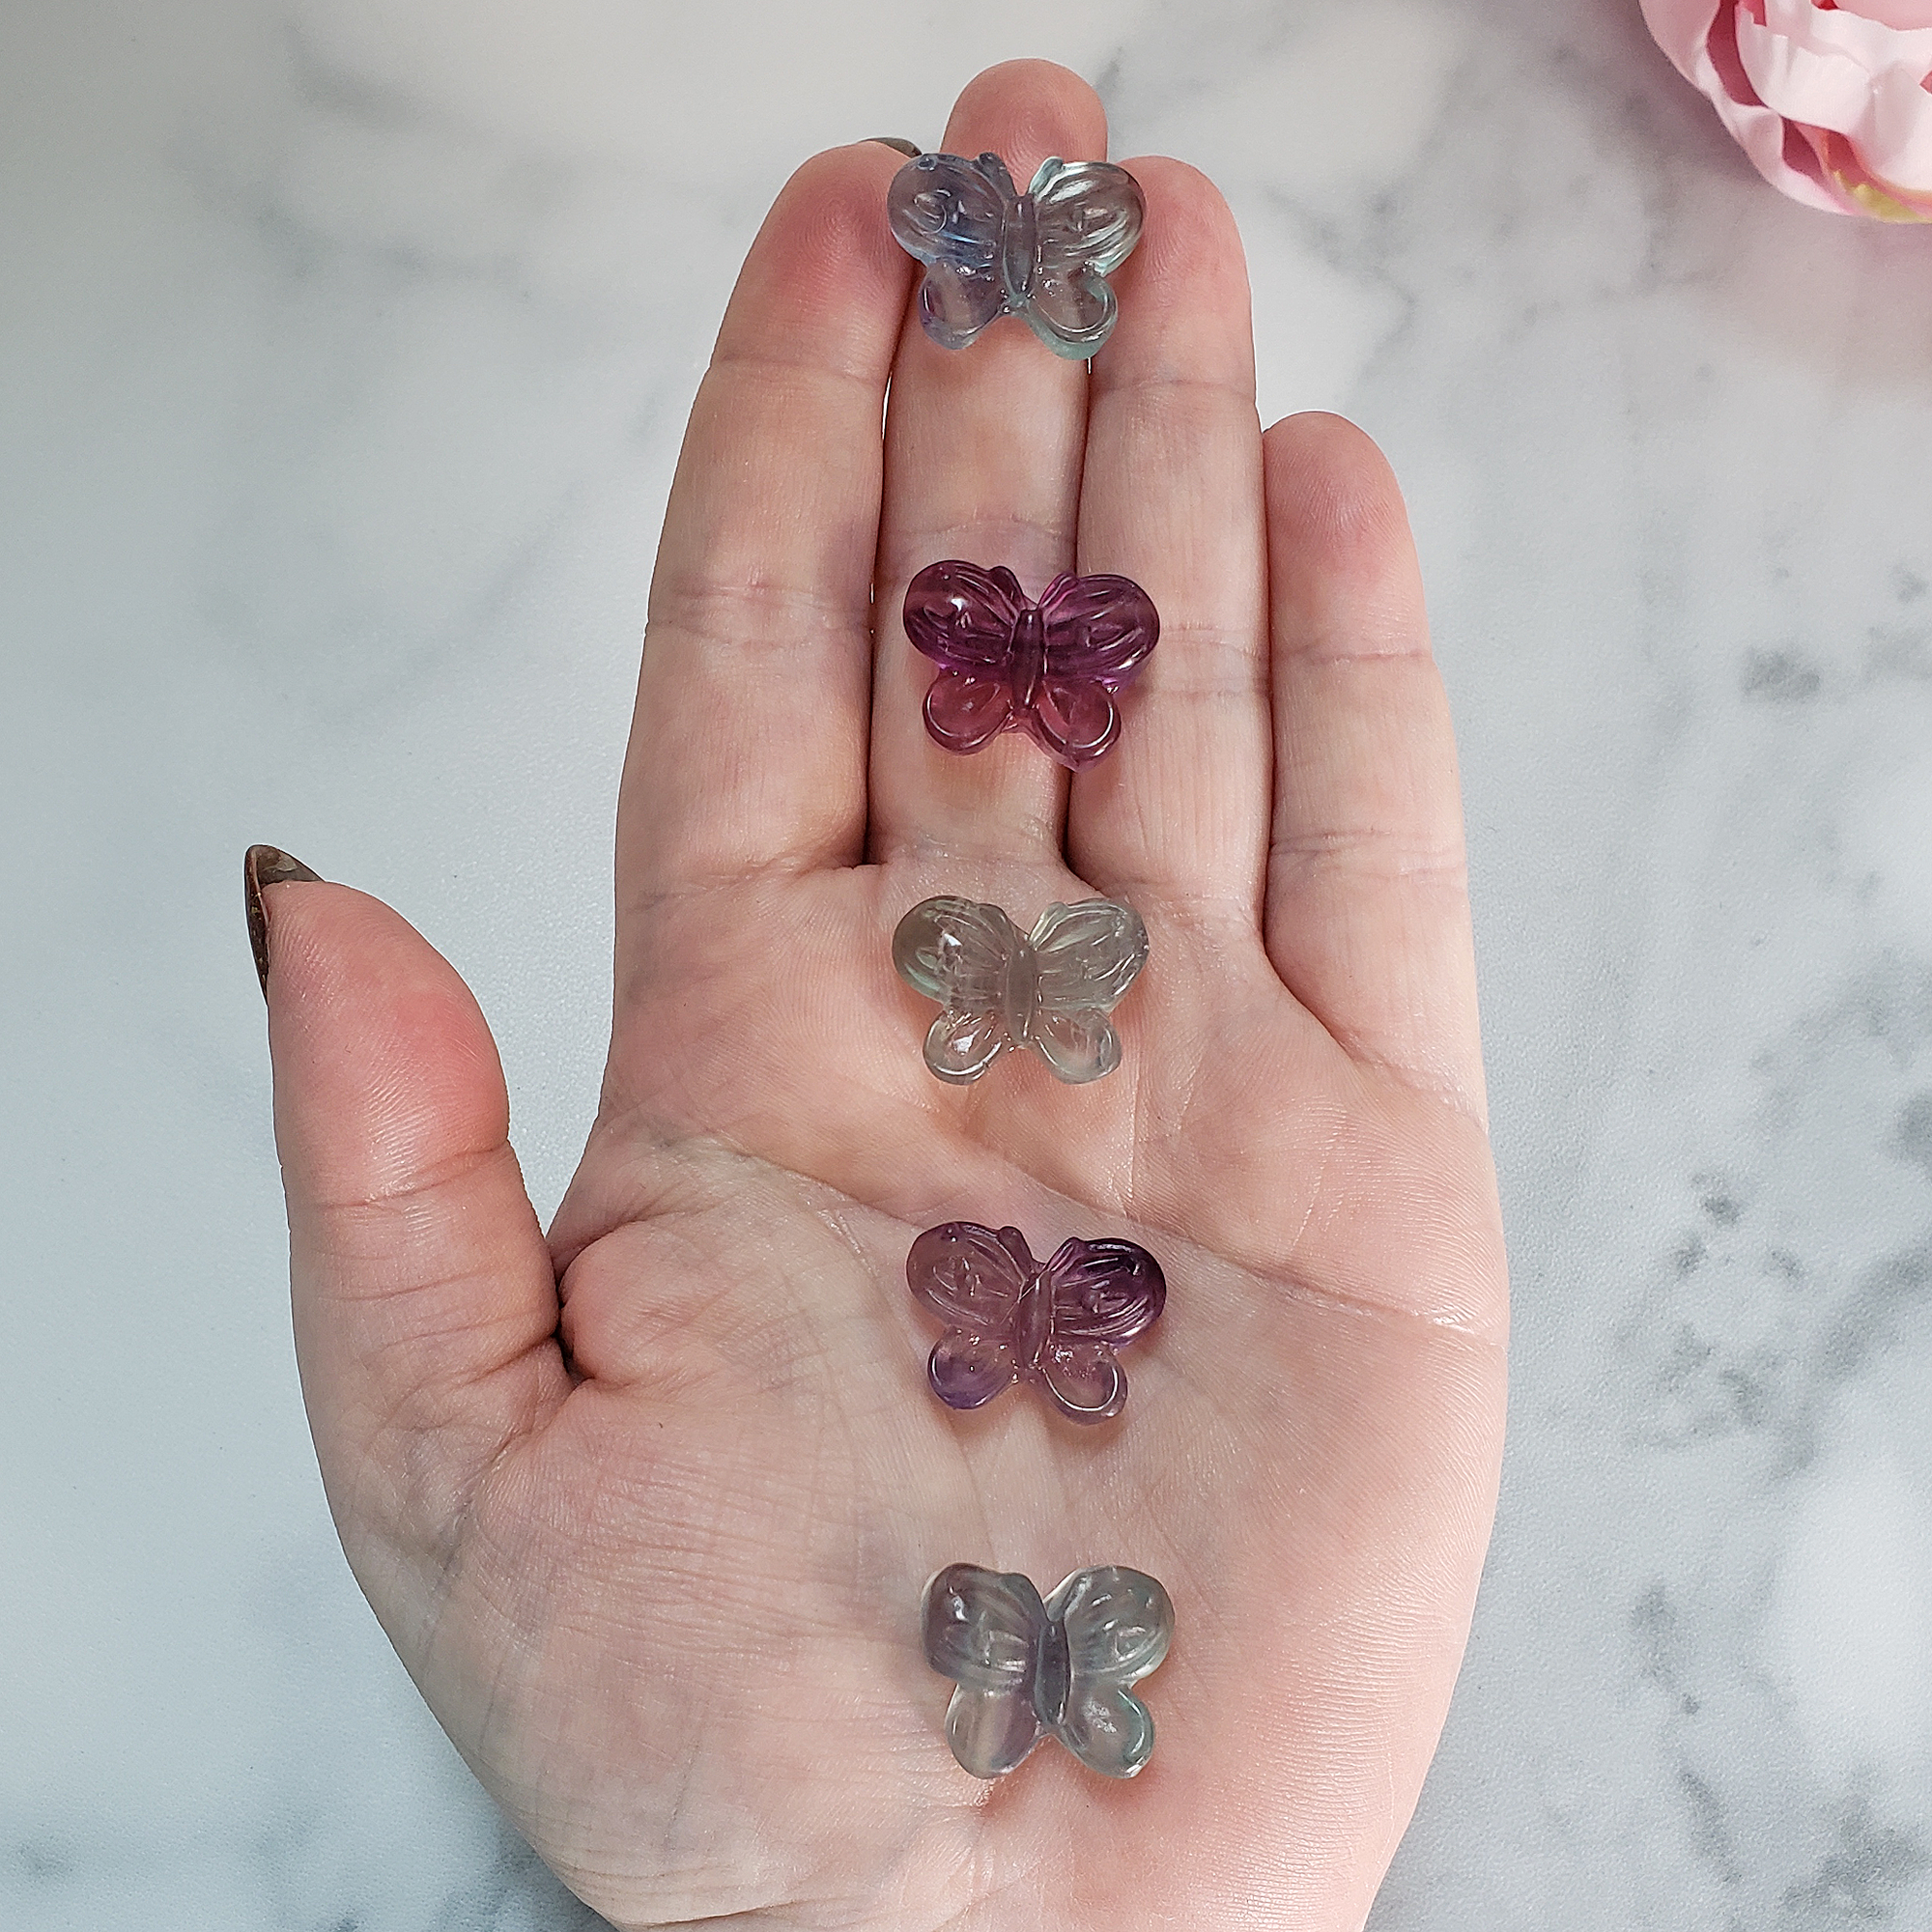 Fluorite Crystal Natural Gemstone Butterfly Mini Carving - Butterflies on Hand Gemstone Totem Carvings